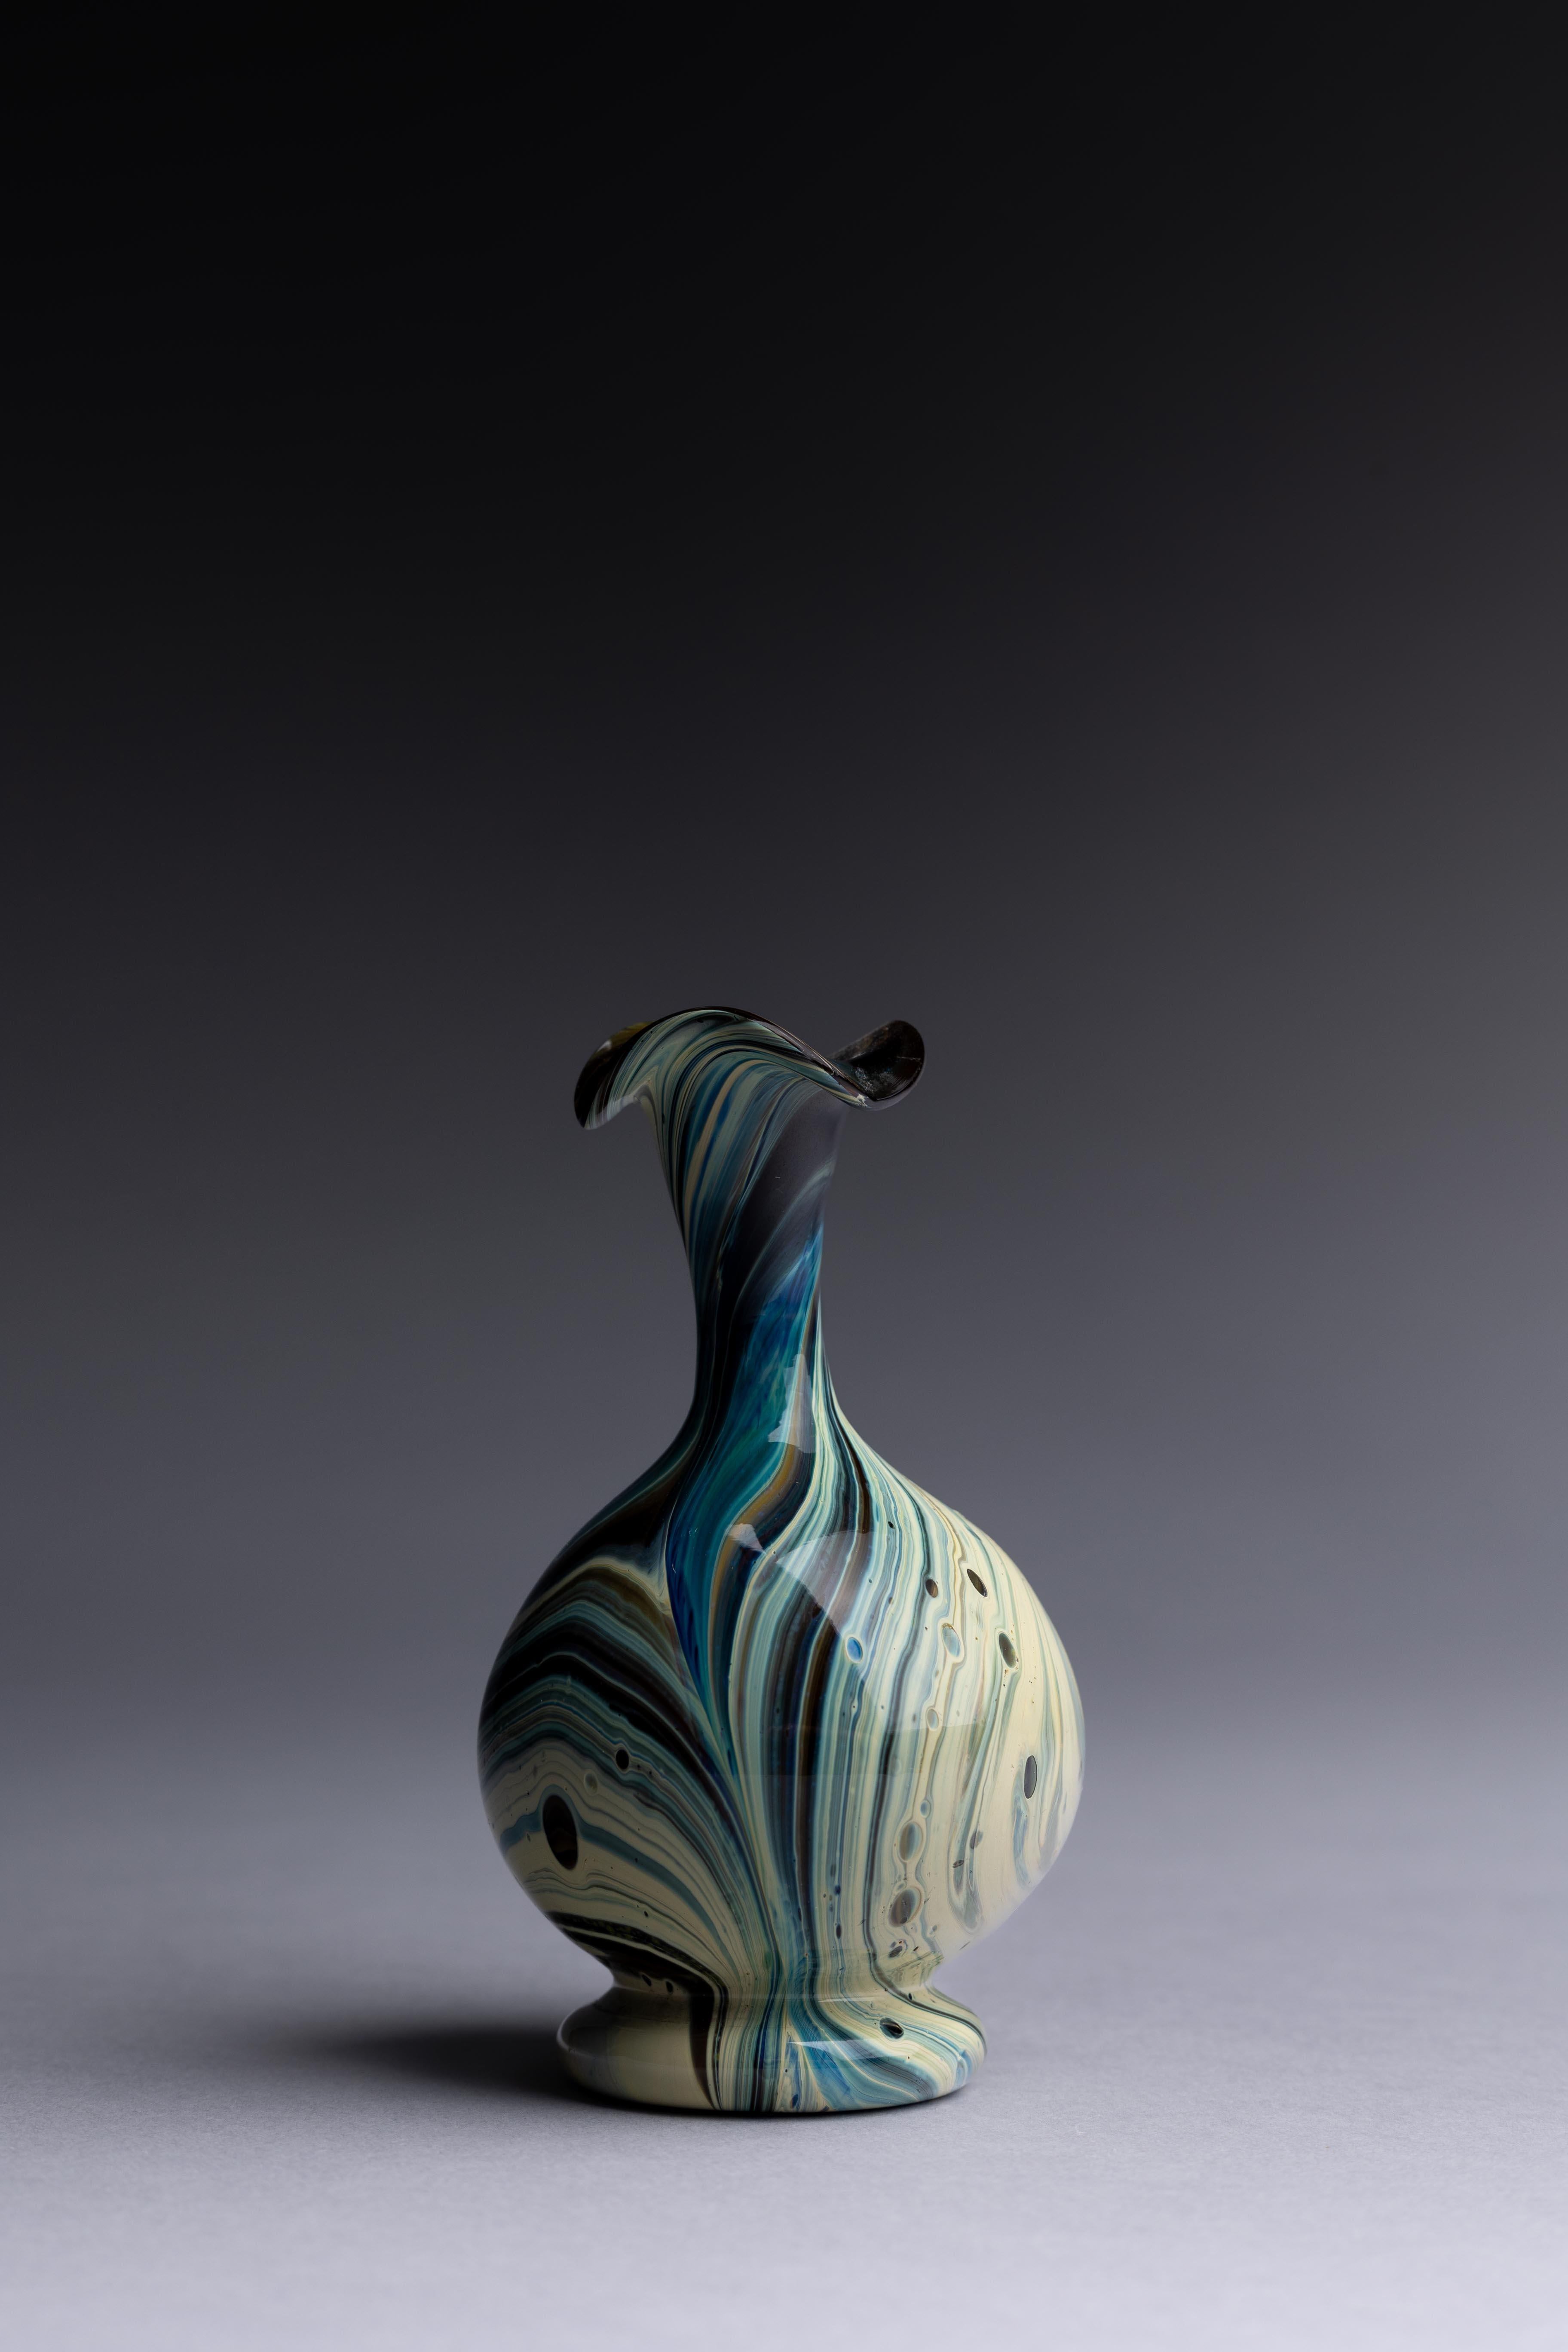 A Murano glass vase made by glass masters Salviati & Co in the late 19th century with a beautifully marbled calcedonio design.

This Murano glass vase, made by Salviati & Co. circa 1880, displays exceptional mastery of the 15th-century Venetian